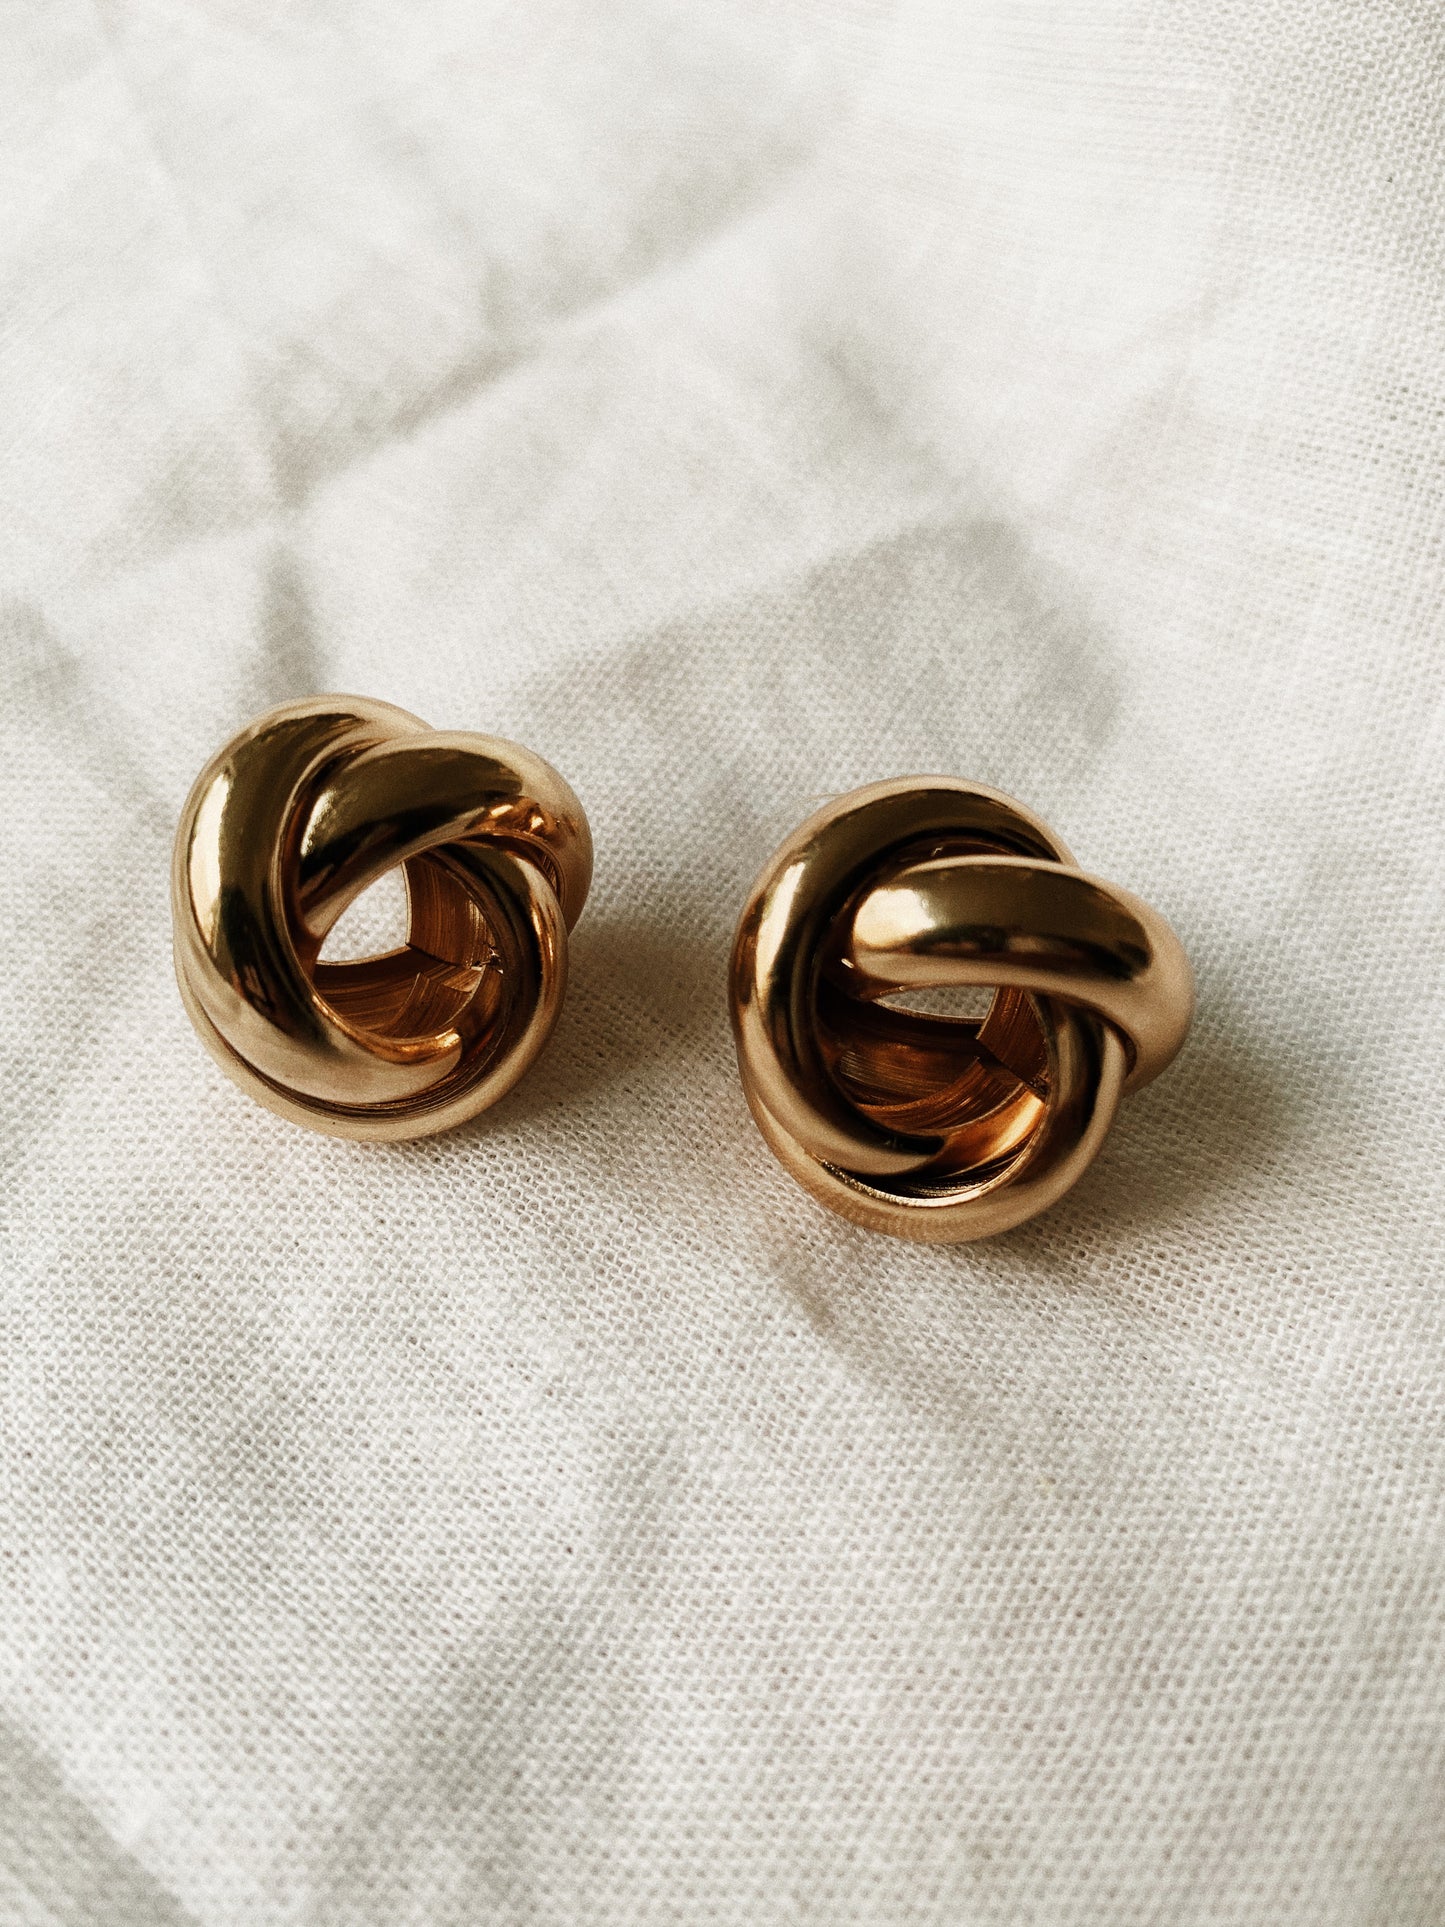 GOLDIE Stud Earrings | By: Life in the sun store